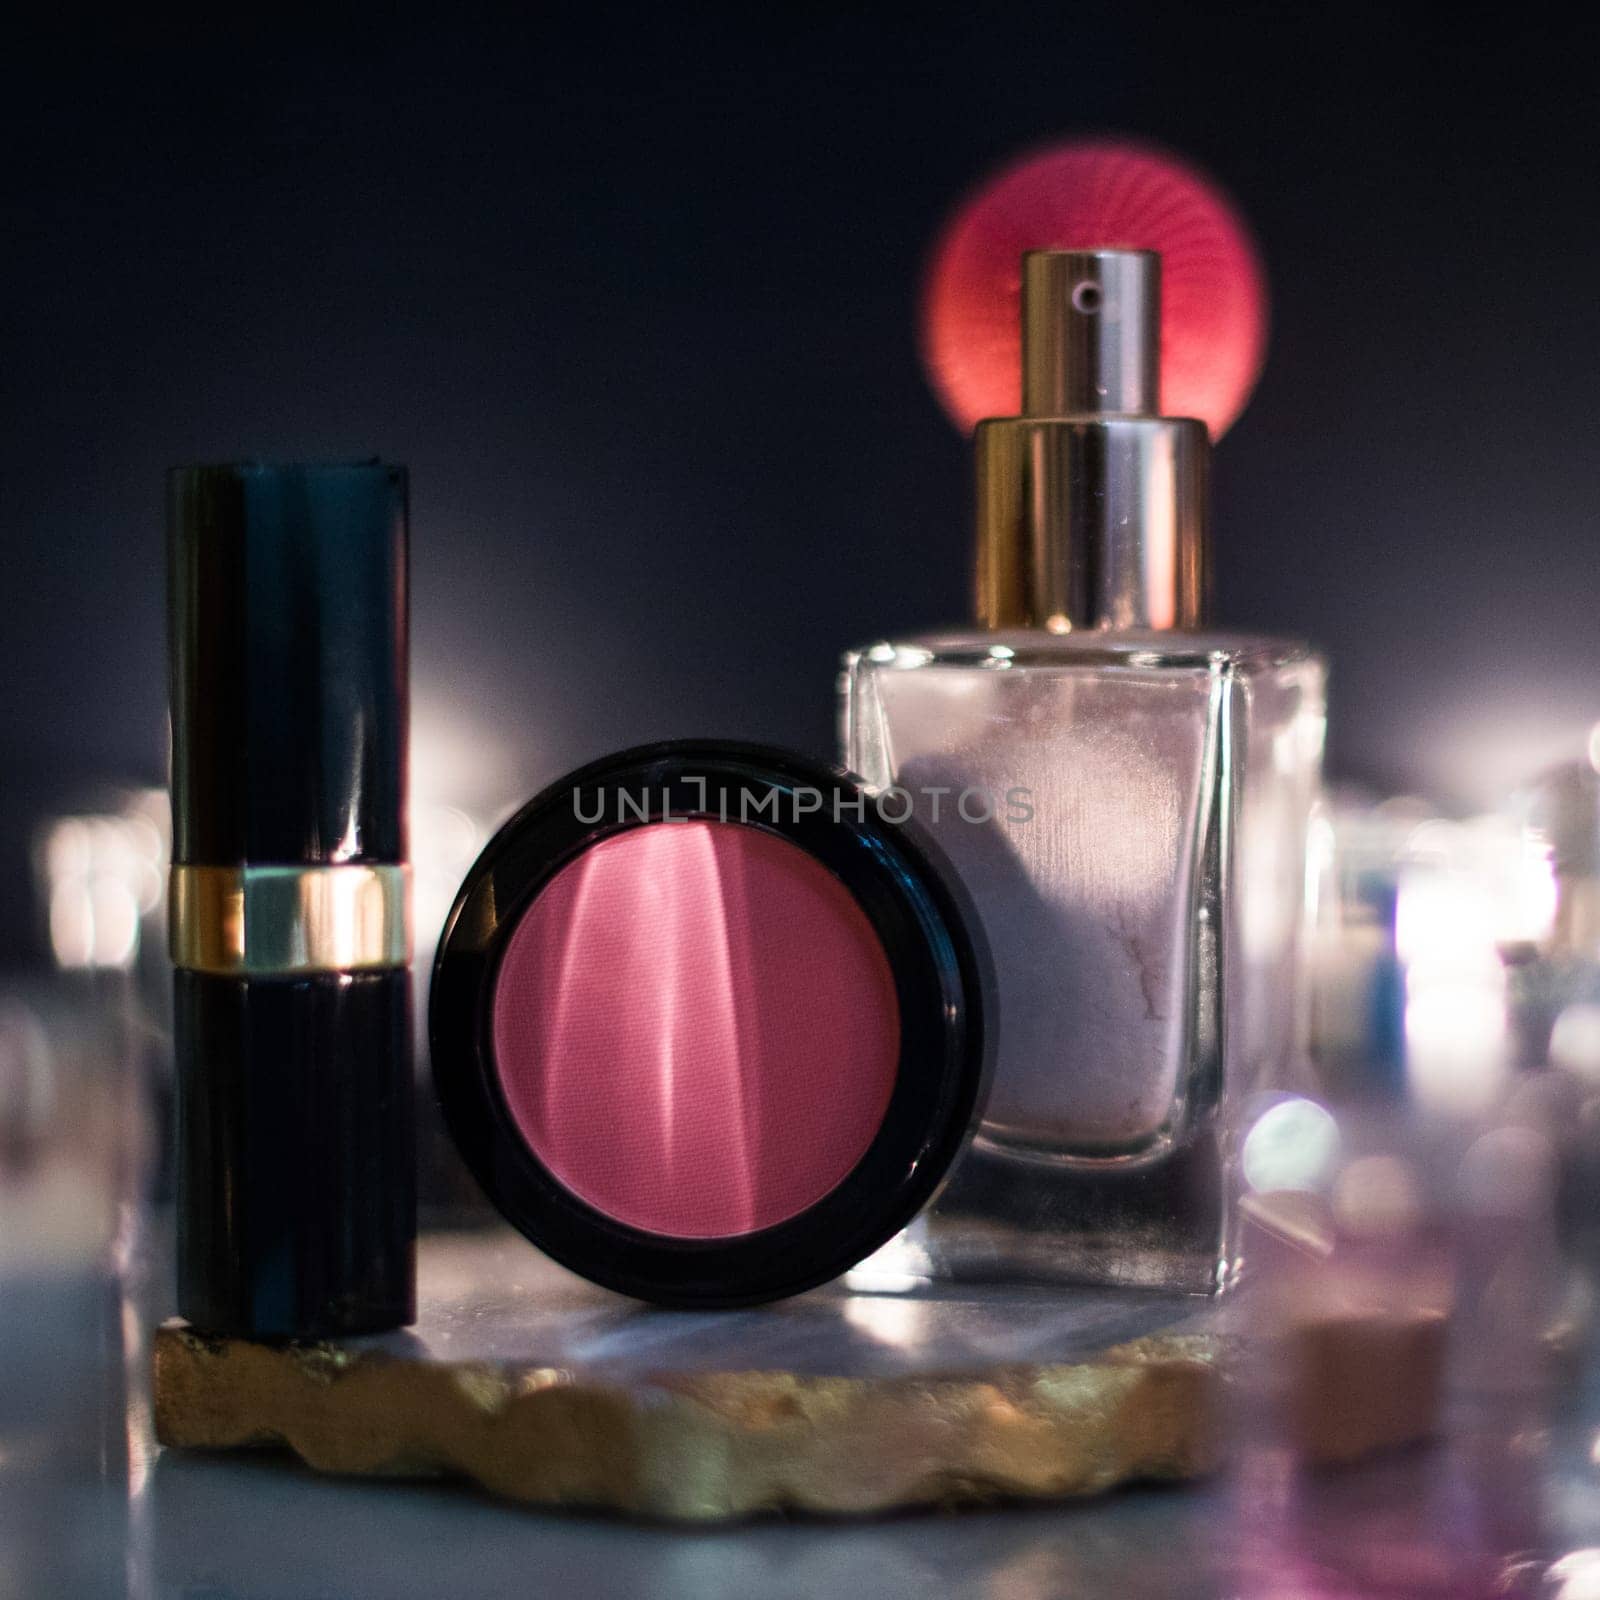 luxury make-up products, cosmetic set - beauty makeup styled concept by Anneleven